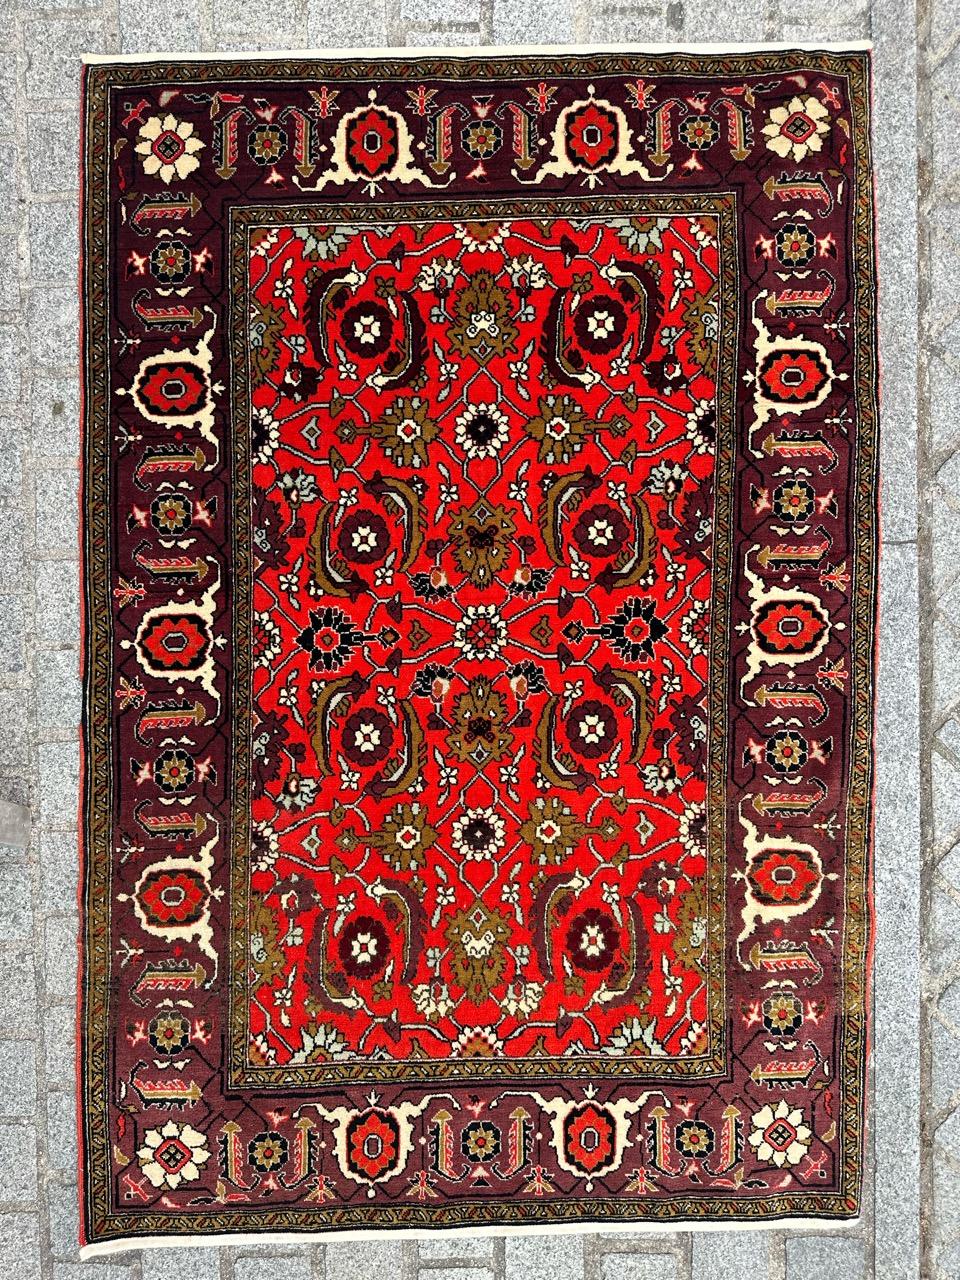 Exquisite midcentury Shirwan Caucasian rug featuring a stunning design inspired by antique Karabagh rugs. This masterpiece boasts vibrant colors and is meticulously hand-knotted with wool velvet on a cotton foundation. The rich red field showcases